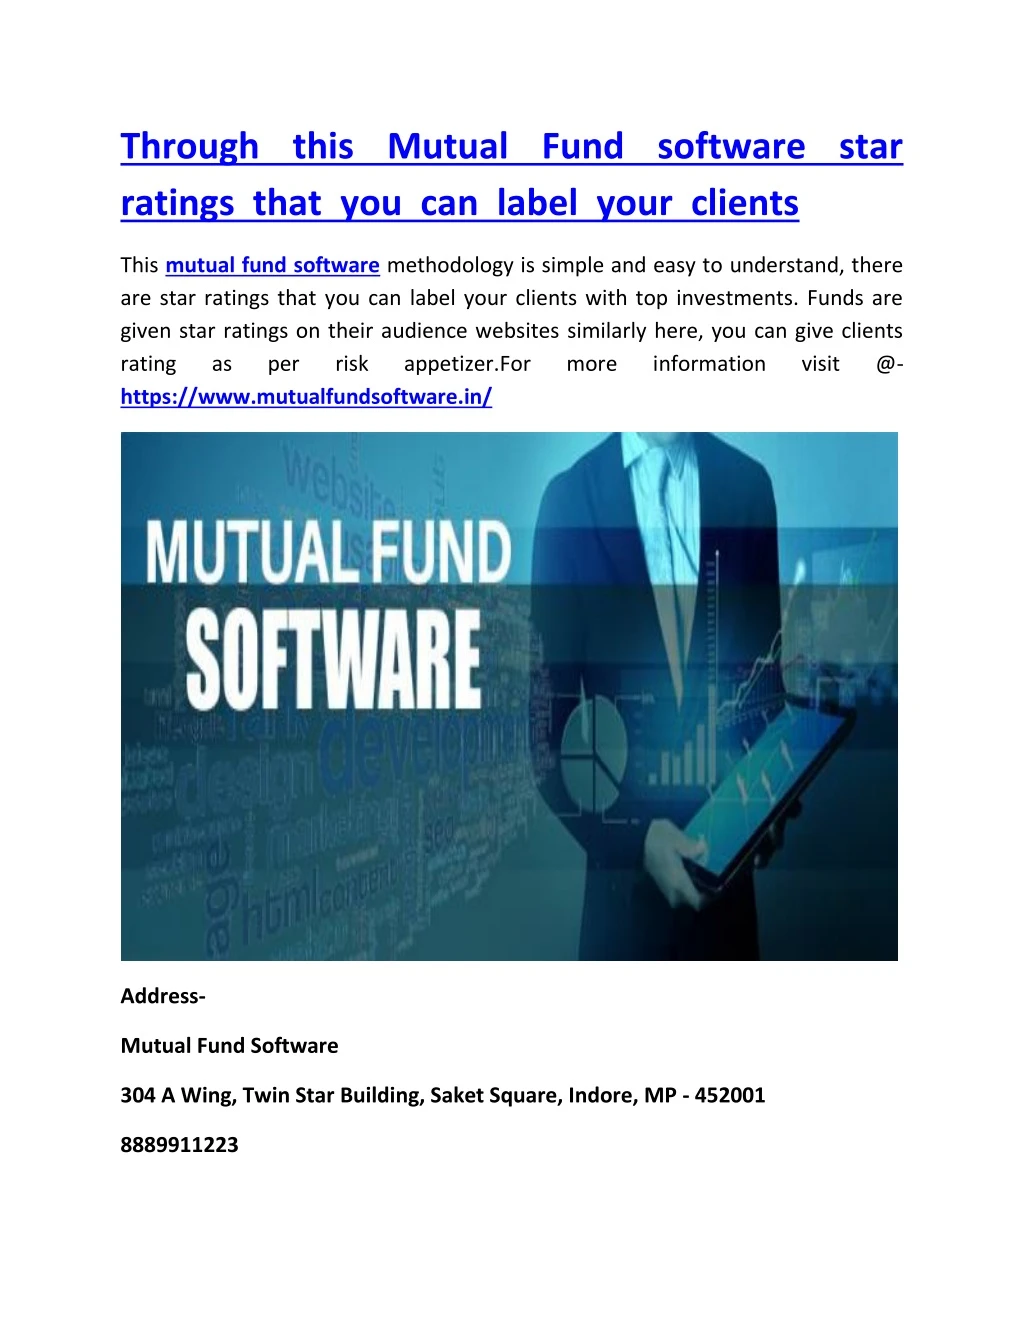 through this mutual fund software star ratings